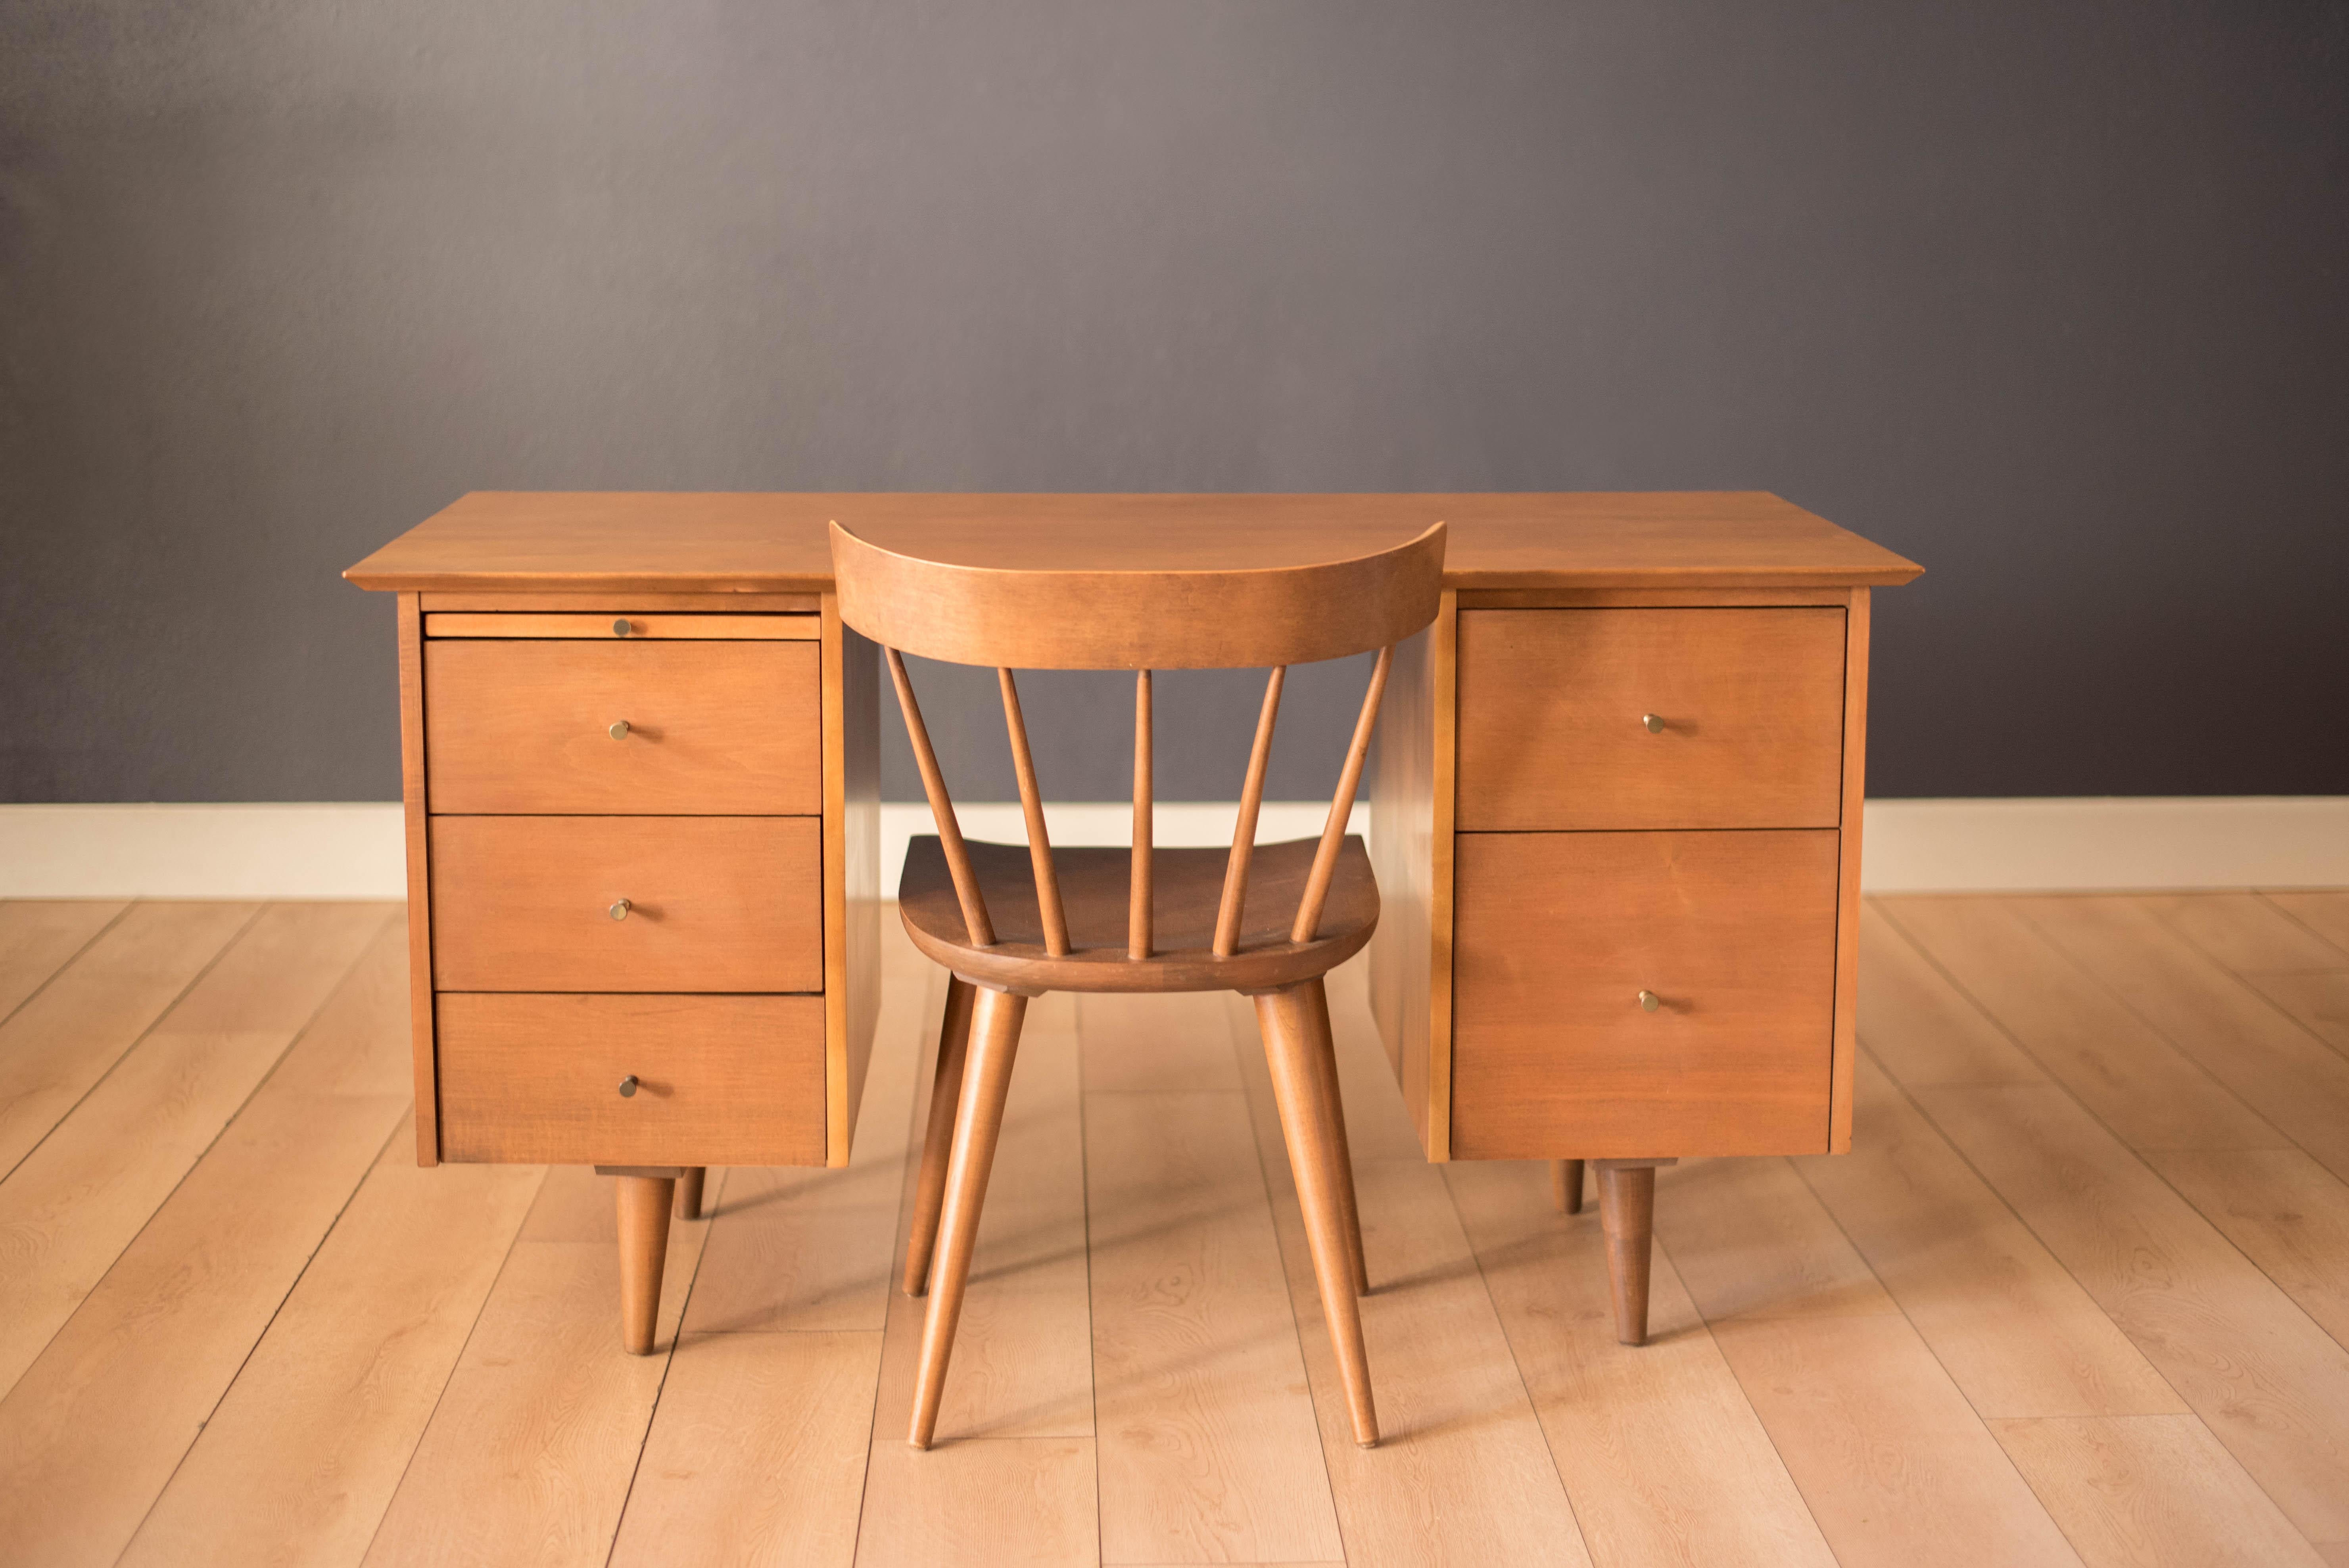 Mid-Century Modern Planner Group side chair no. 1531 by Paul McCobb for Winchendon Furniture Co. This piece is constructed of solid maple in the original tobacco finish designed with a spindle supporting backrest and signature joinery. Perfect to